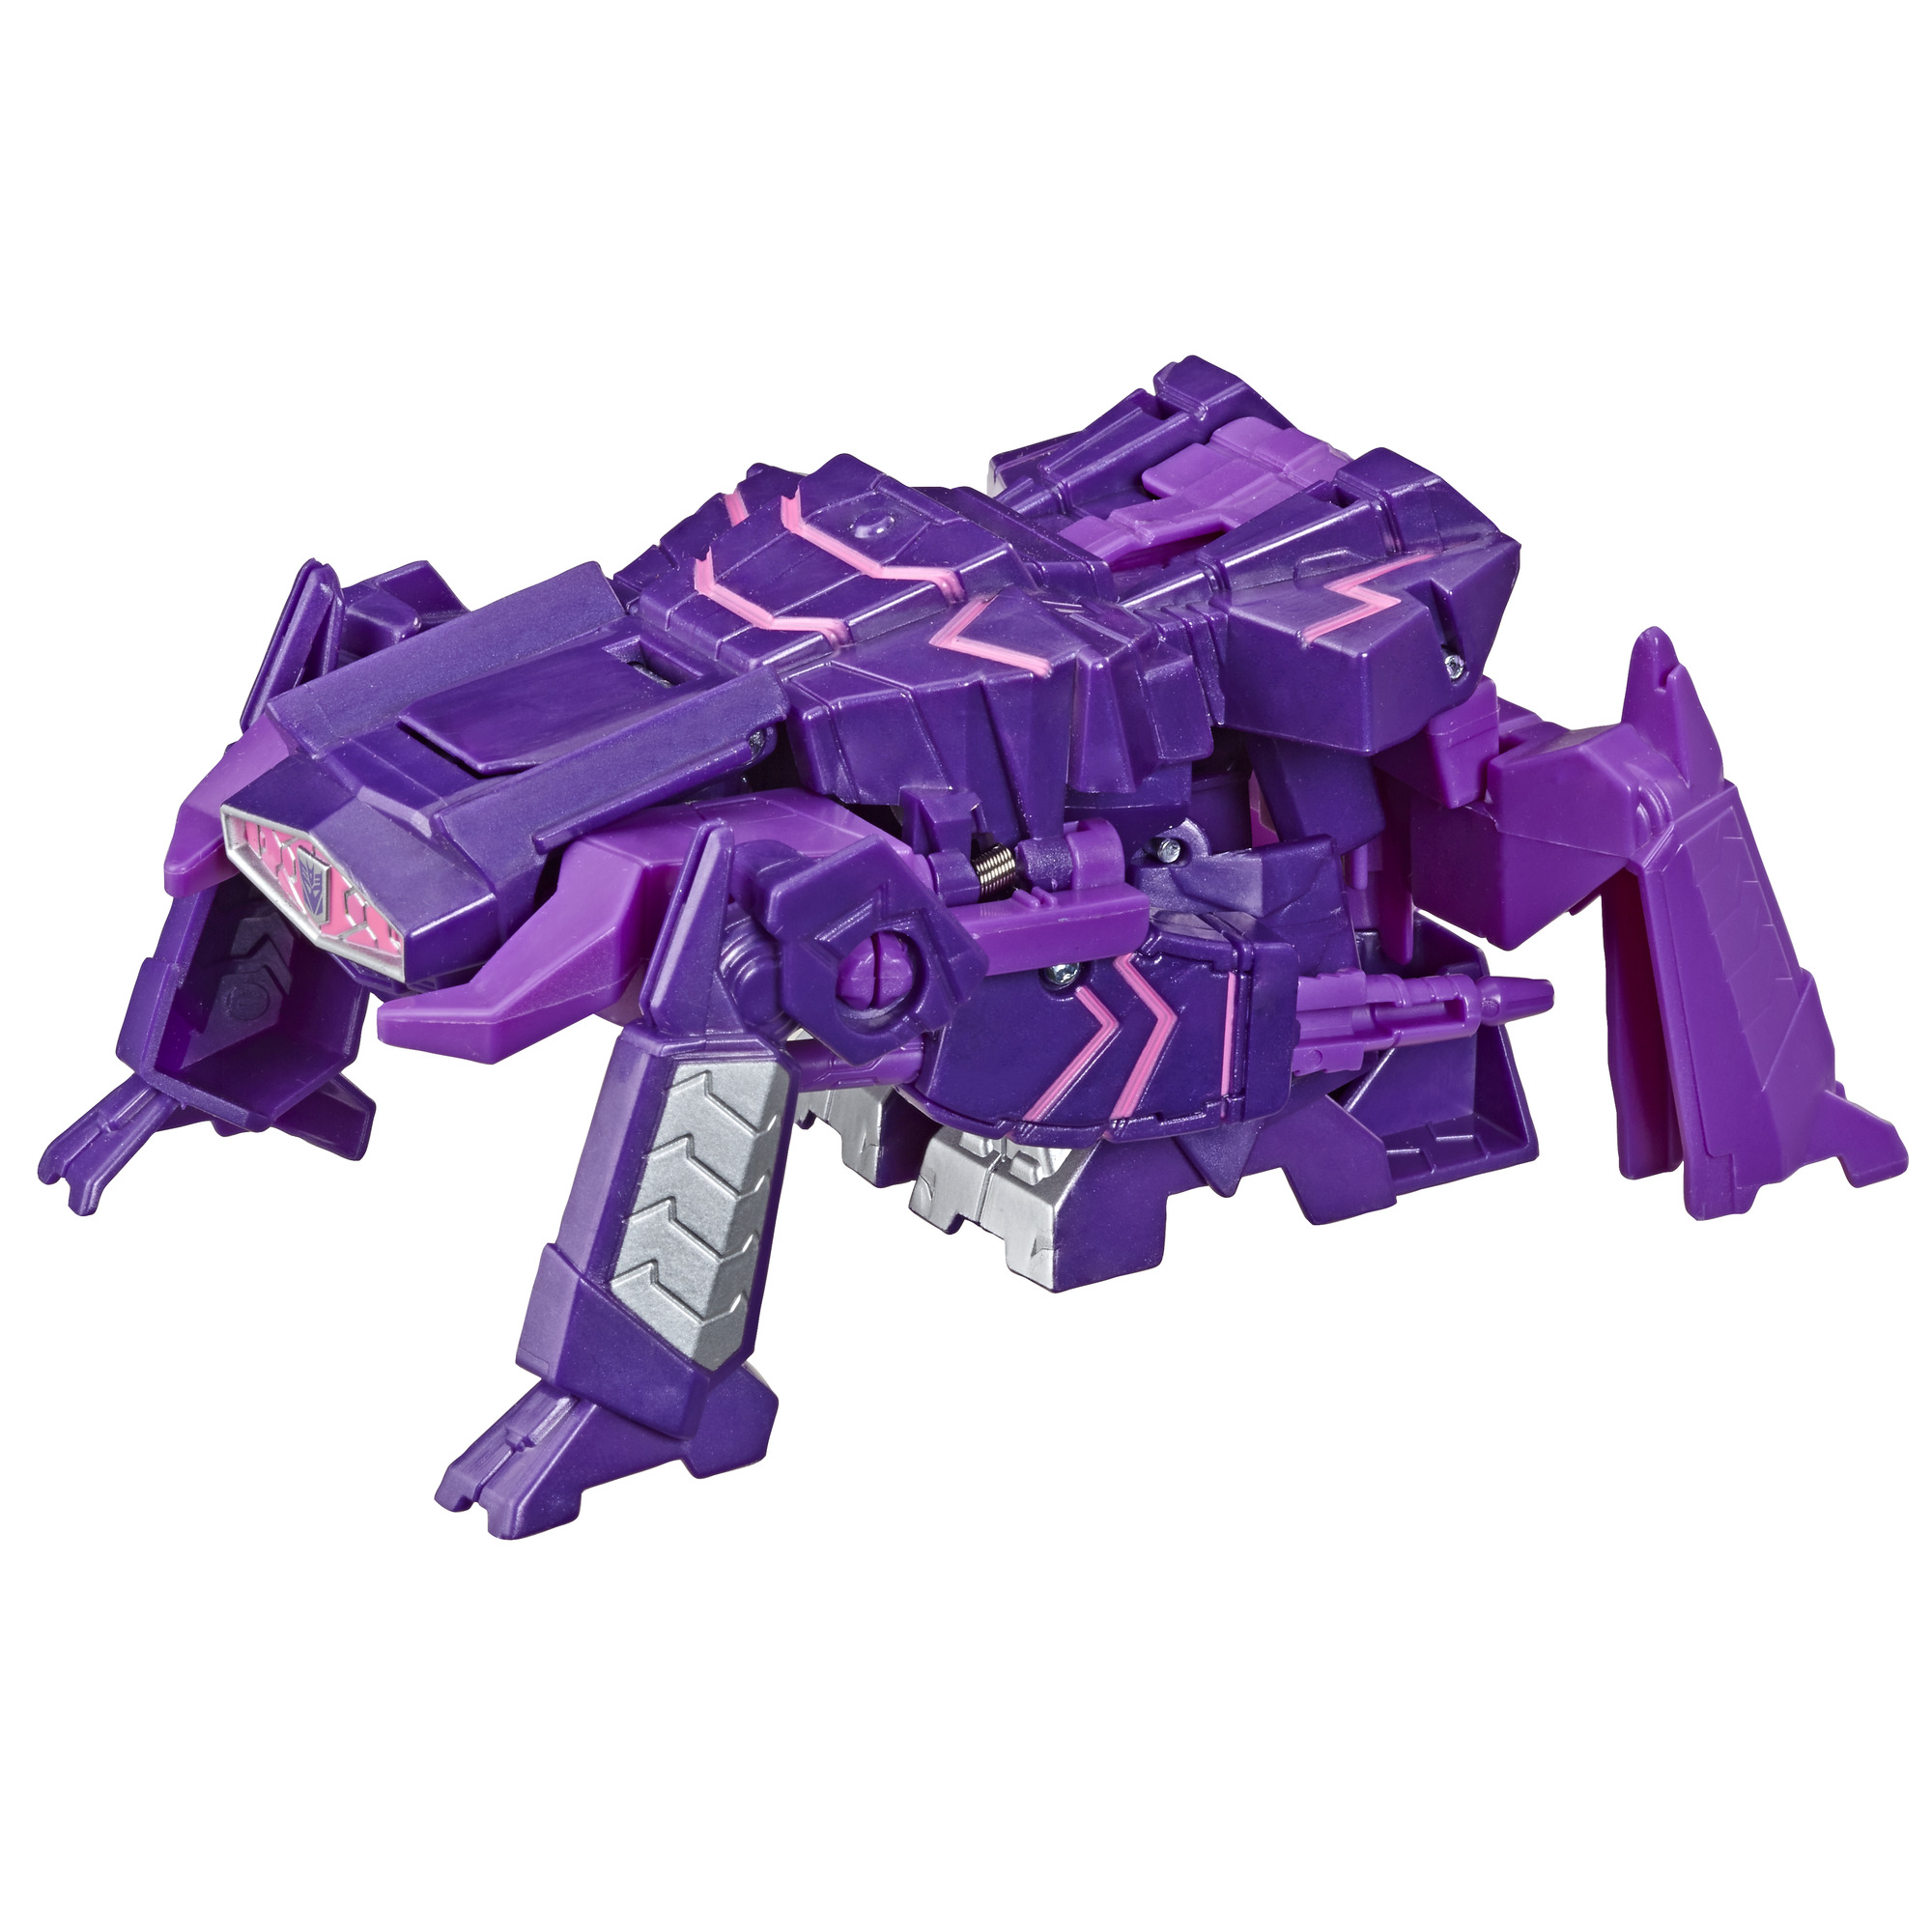 Transformers Cyberverse Action Attackers: 1-Step Changer Shockwave Action Figure - image 3 of 10